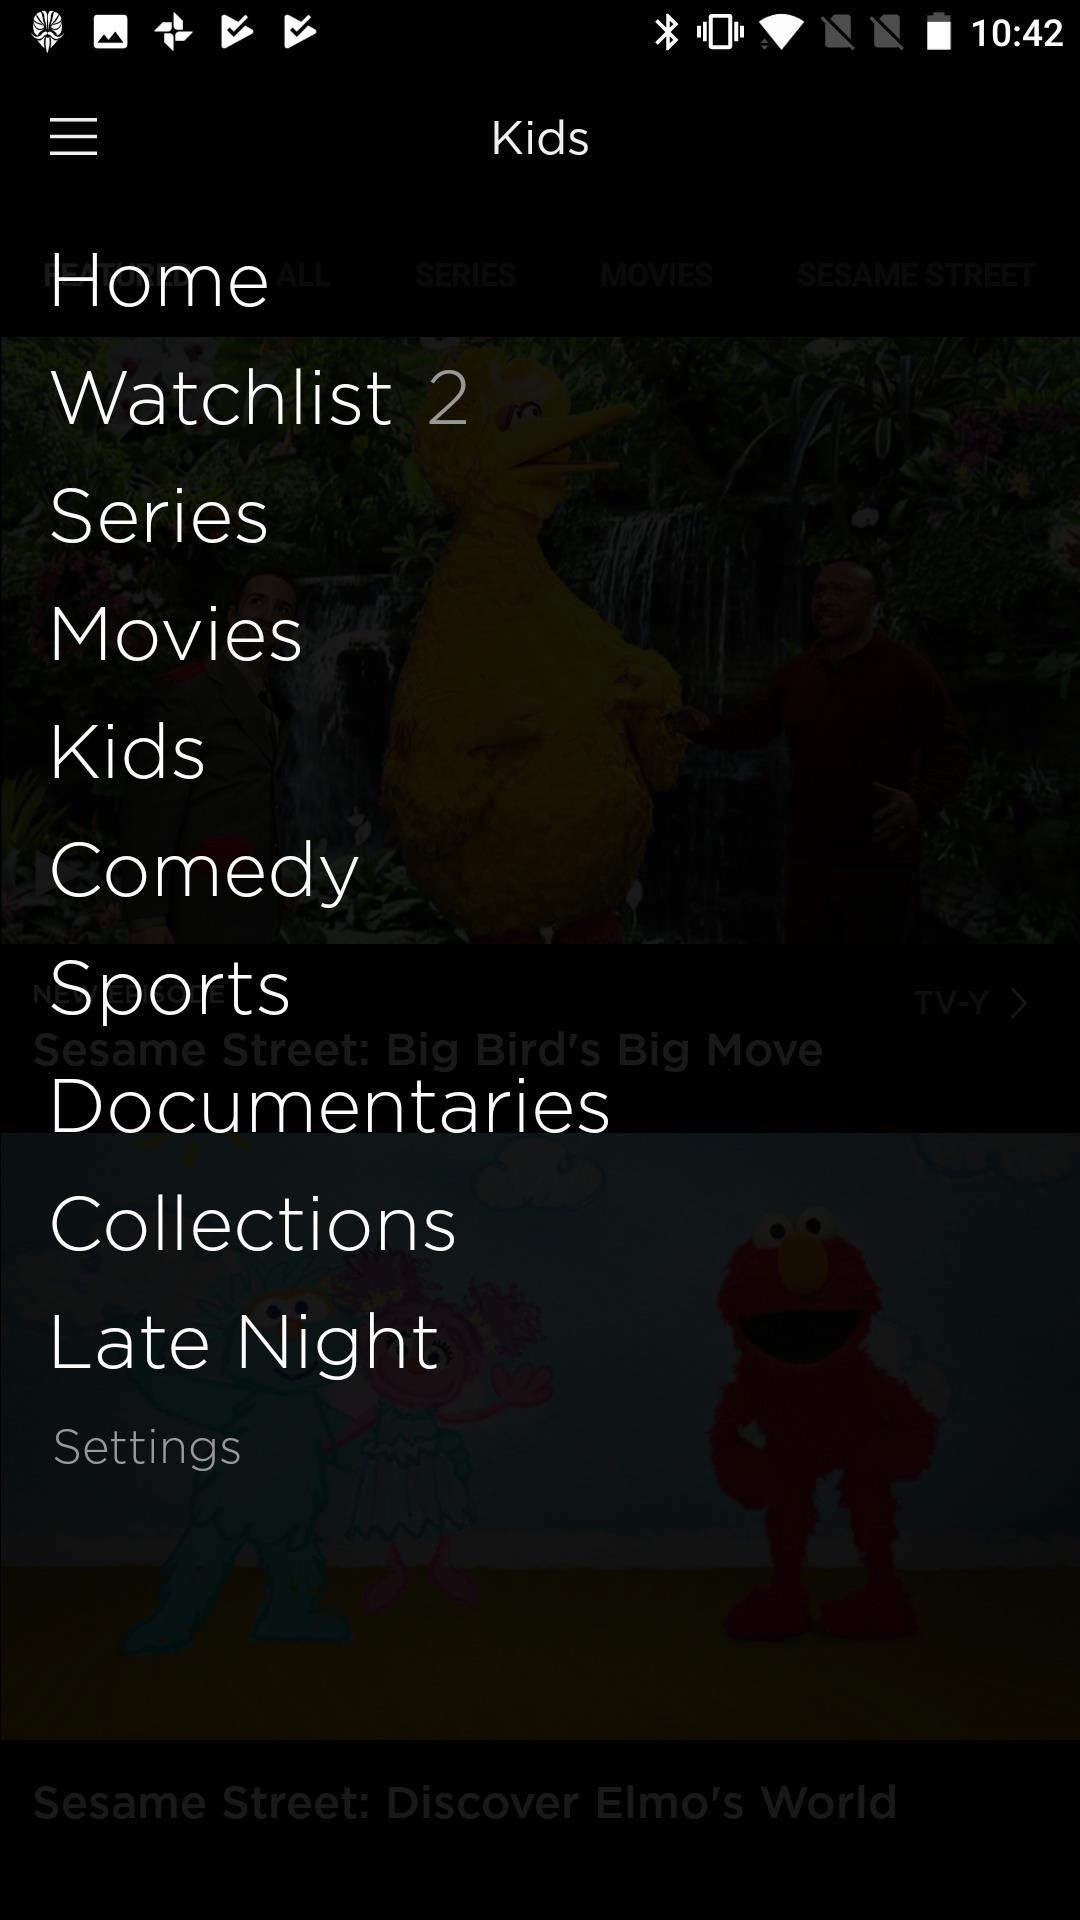 HBO Now 101: How to Manage Parental Controls to Block Mature Content